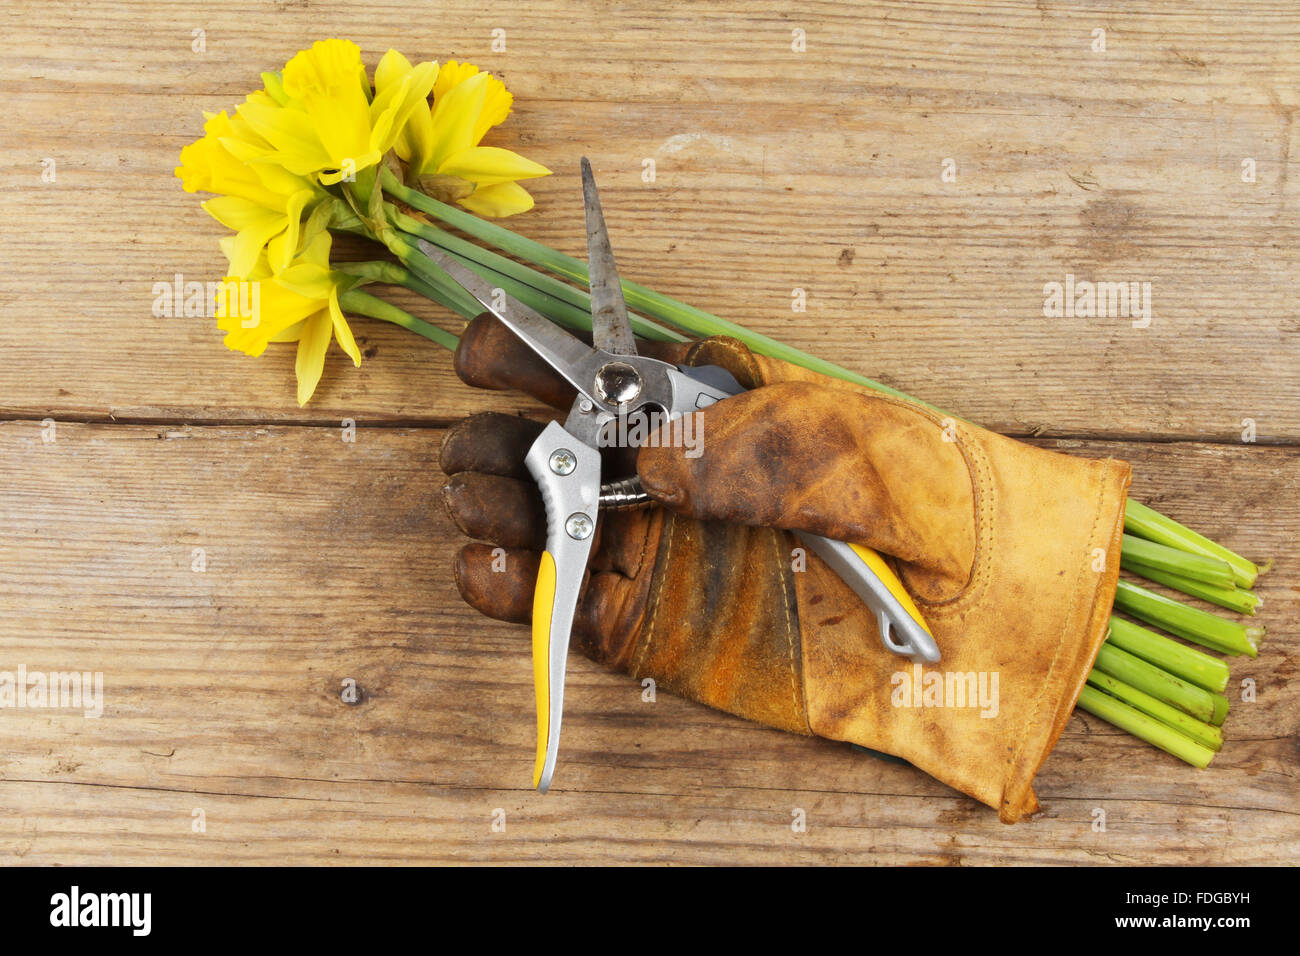 Freshly cut Daffodils with a gardening glove and secateurs on a wooden board Stock Photo